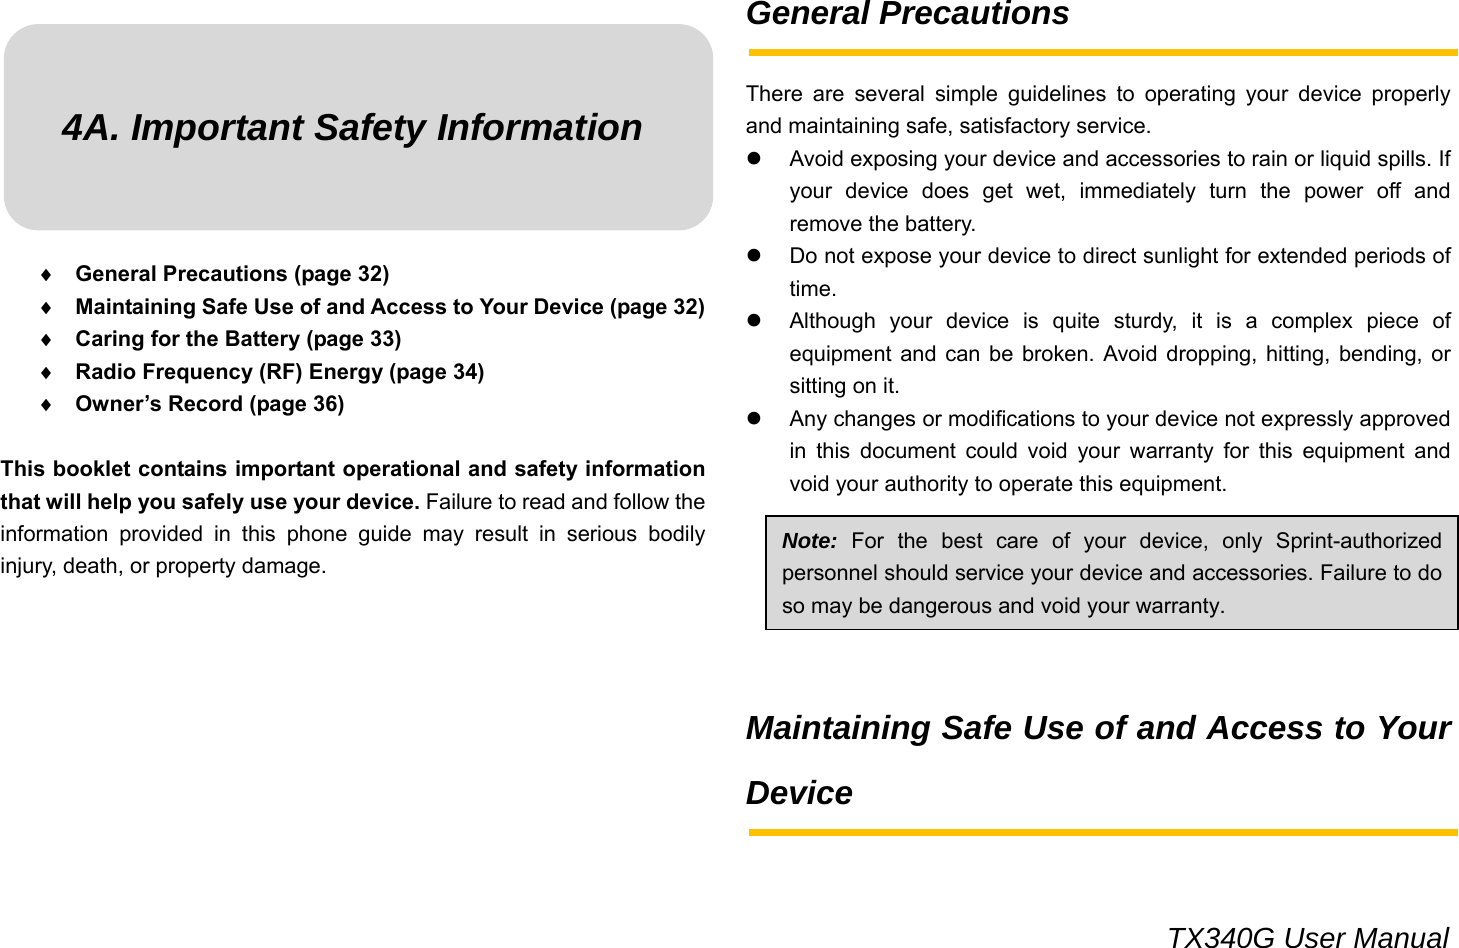                                                                                 TX340G User Manual 4A. Important Safety Information    ♦ General Precautions (page 32) ♦ Maintaining Safe Use of and Access to Your Device (page 32) ♦ Caring for the Battery (page 33) ♦ Radio Frequency (RF) Energy (page 34) ♦ Owner’s Record (page 36)  This booklet contains important operational and safety information that will help you safely use your device. Failure to read and follow the information provided in this phone guide may result in serious bodily injury, death, or property damage.          General Precautions  There are several simple guidelines to operating your device properly and maintaining safe, satisfactory service.   z  Avoid exposing your device and accessories to rain or liquid spills. If your device does get wet, immediately turn the power off and remove the battery. z  Do not expose your device to direct sunlight for extended periods of time. z  Although your device is quite sturdy, it is a complex piece of equipment and can be broken. Avoid dropping, hitting, bending, or sitting on it. z  Any changes or modifications to your device not expressly approved in this document could void your warranty for this equipment and void your authority to operate this equipment.       Maintaining Safe Use of and Access to Your Device   Note: For the best care of your device, only Sprint-authorized personnel should service your device and accessories. Failure to do so may be dangerous and void your warranty. 